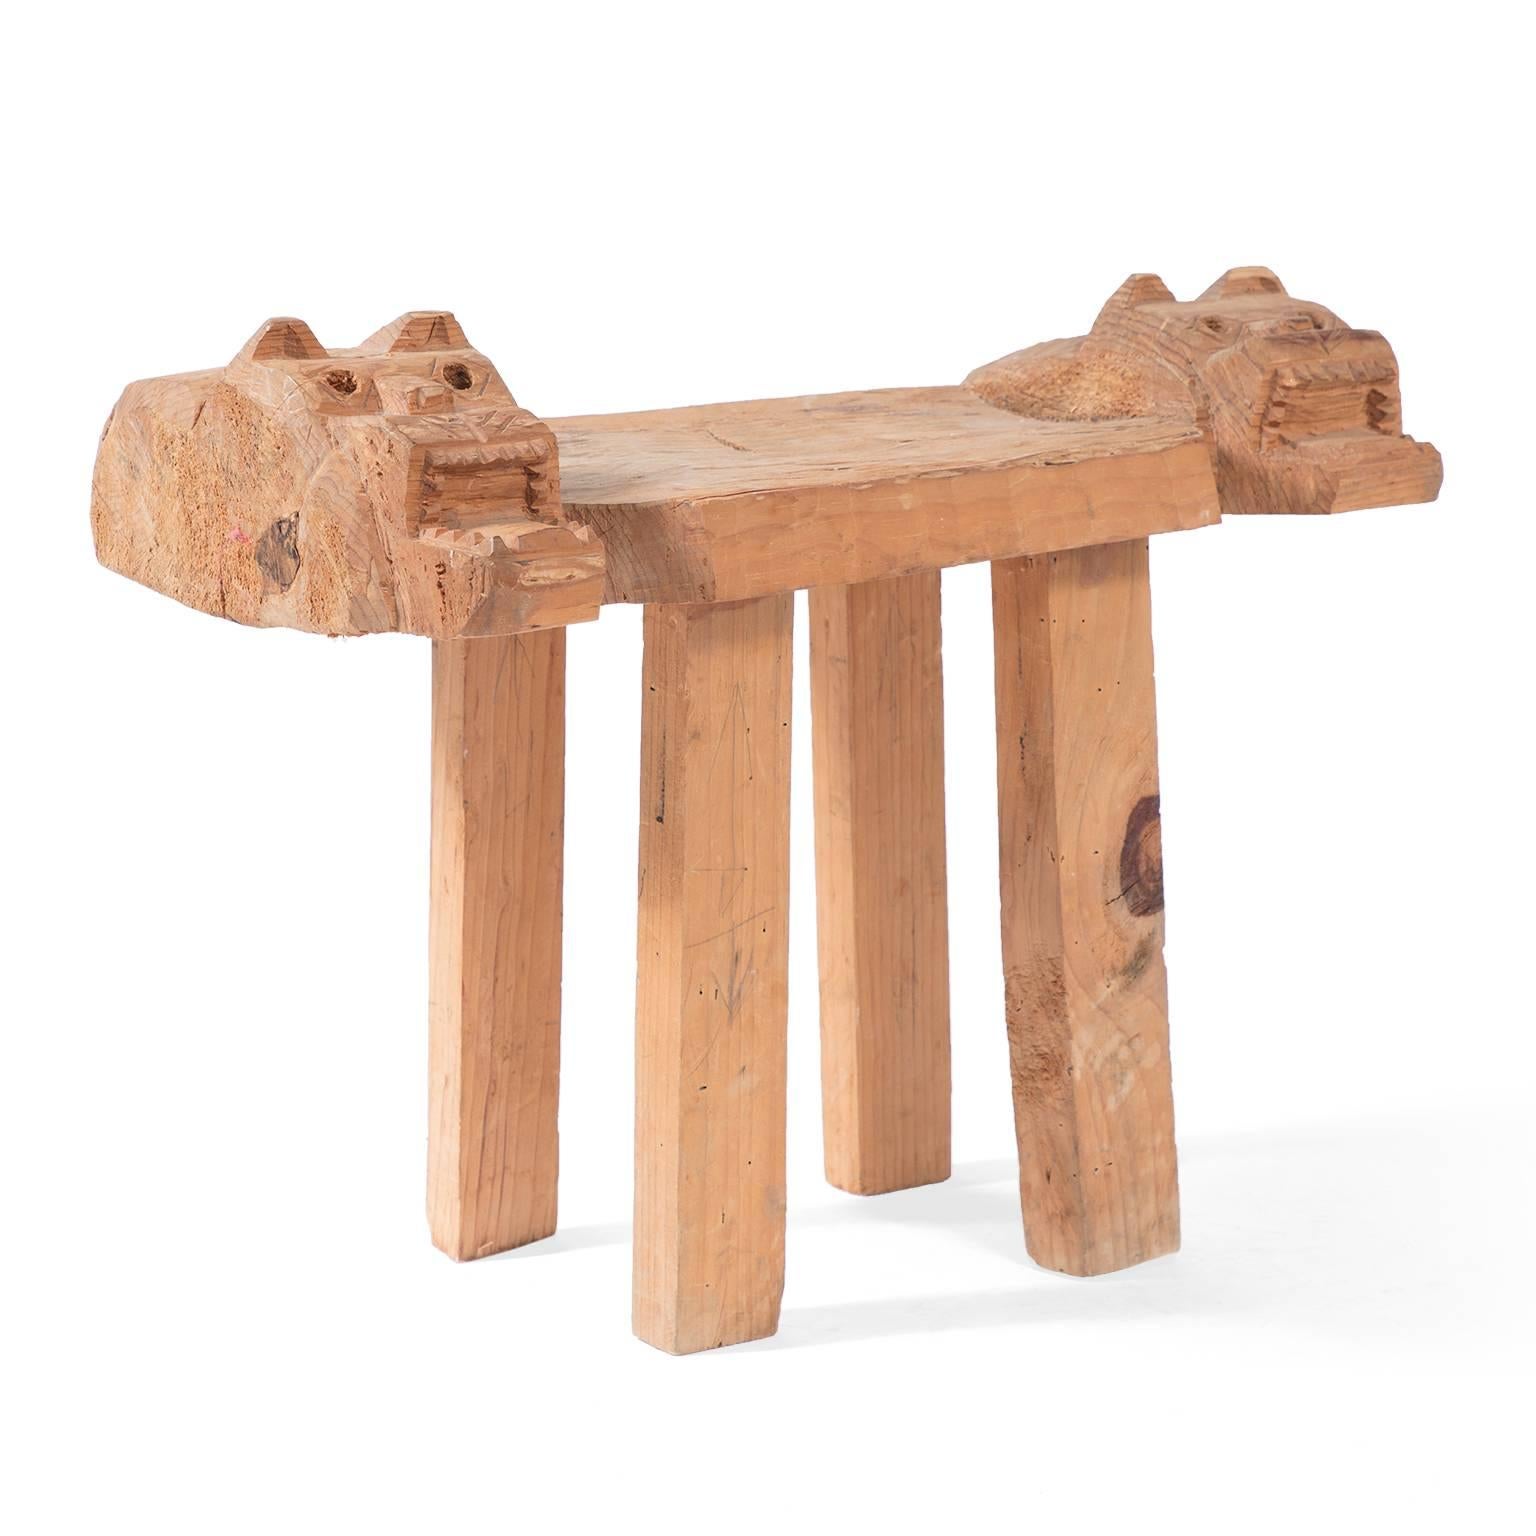 This rustic wood bench was crafted in a Pre-Columbian Folk Art style, with two jaguar heads on either end. Symbolic of divinity and leadership, each jaguar features individually carved triangular ears, diamond-shaped eyes, incised whiskers and